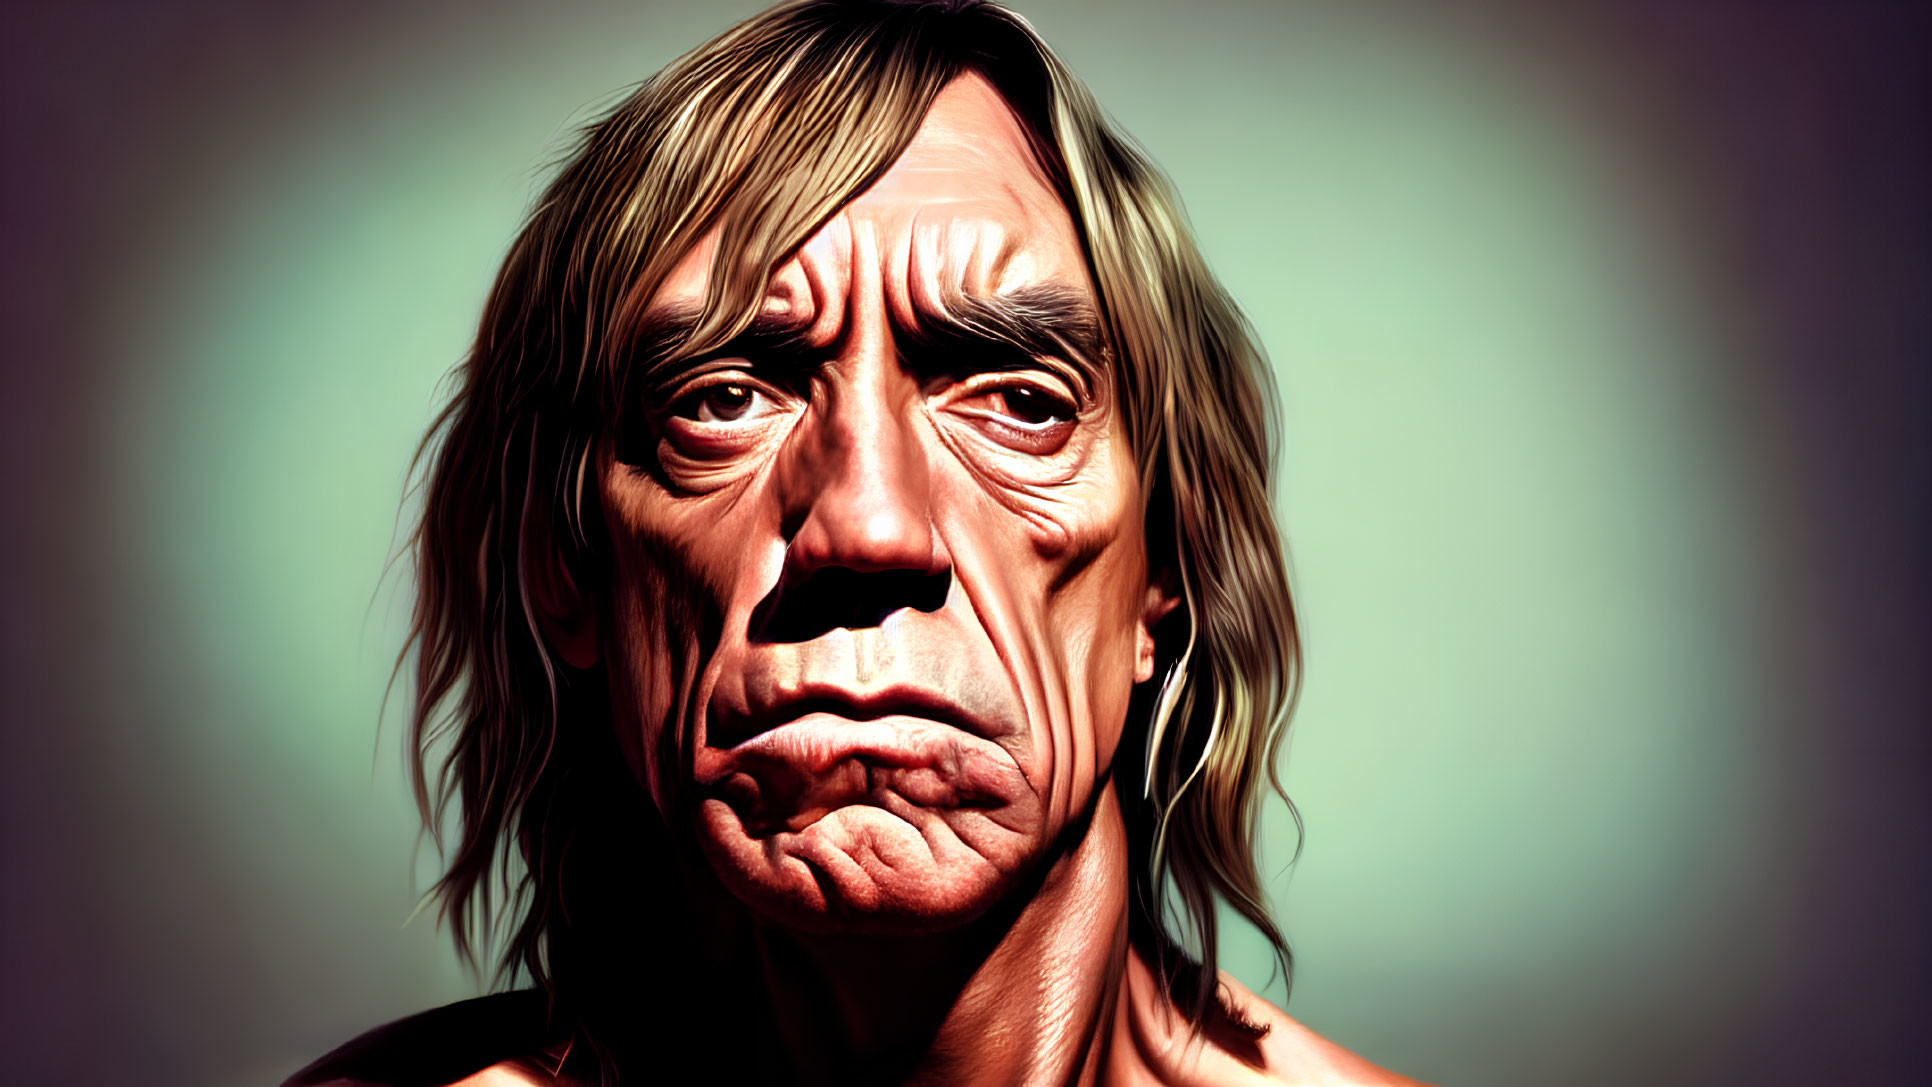 Stylized digital portrait of a man with shoulder-length hair and somber expression